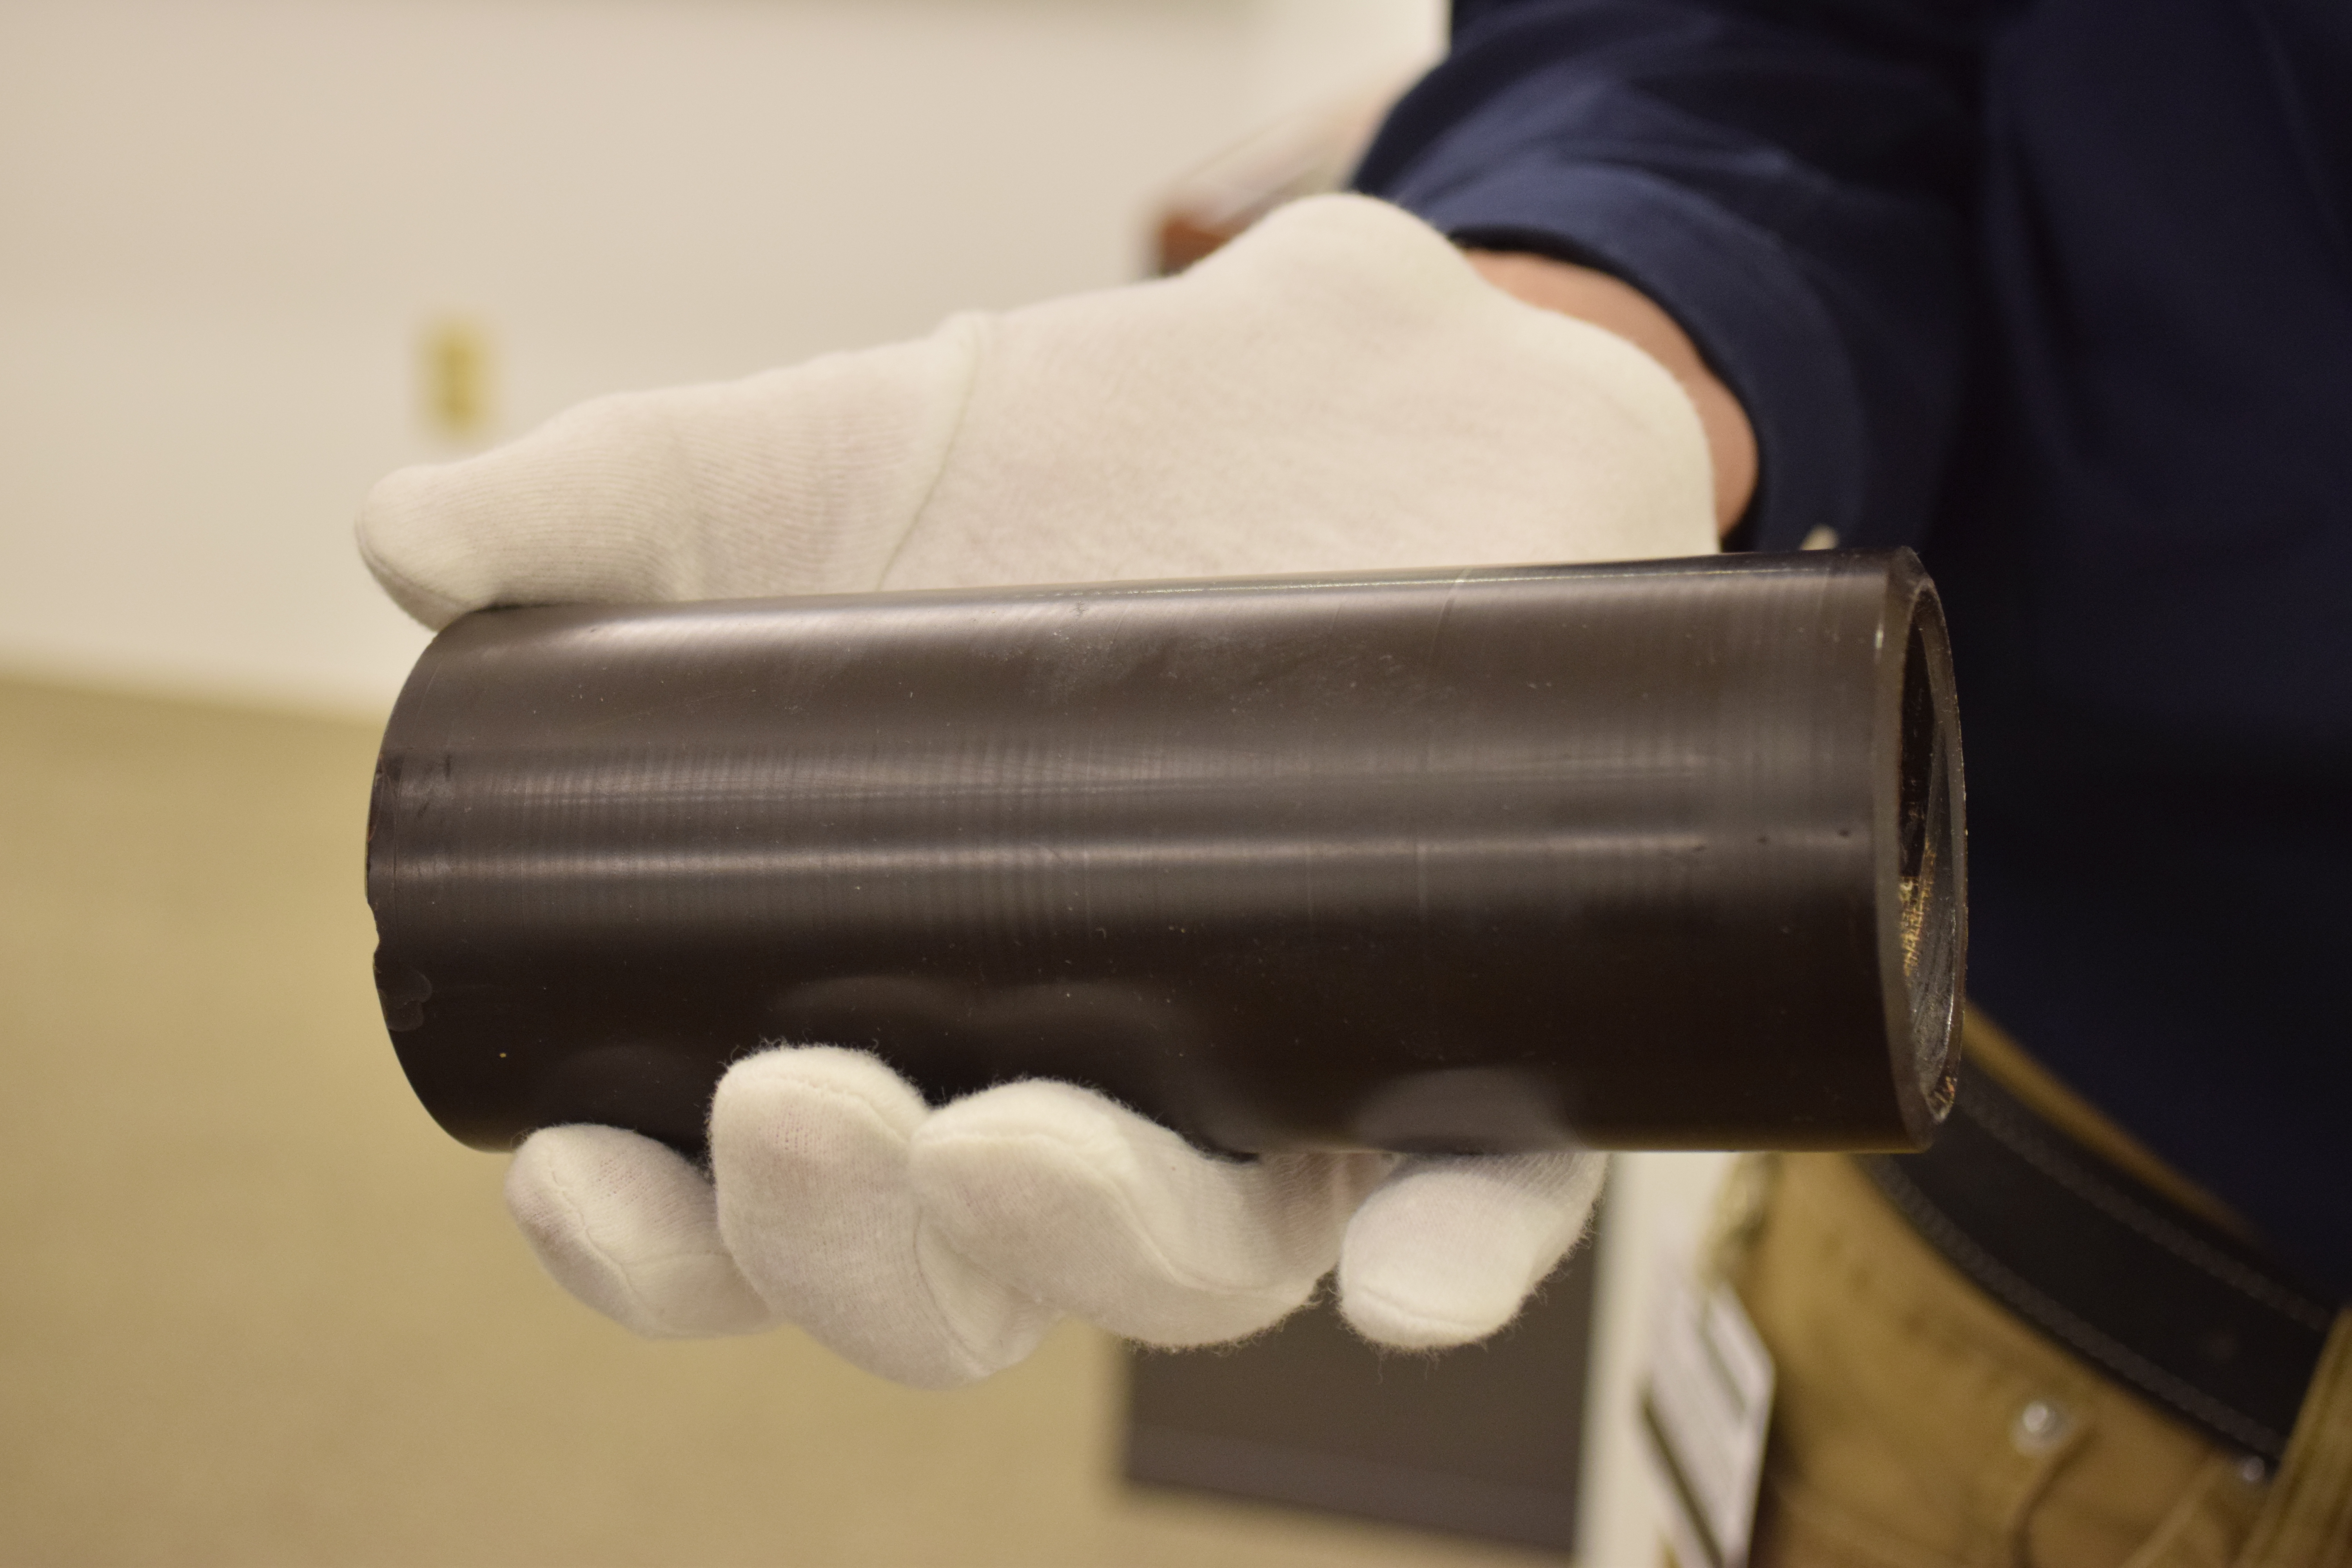 Figure 2. Wax Cylinder from the FCB collection